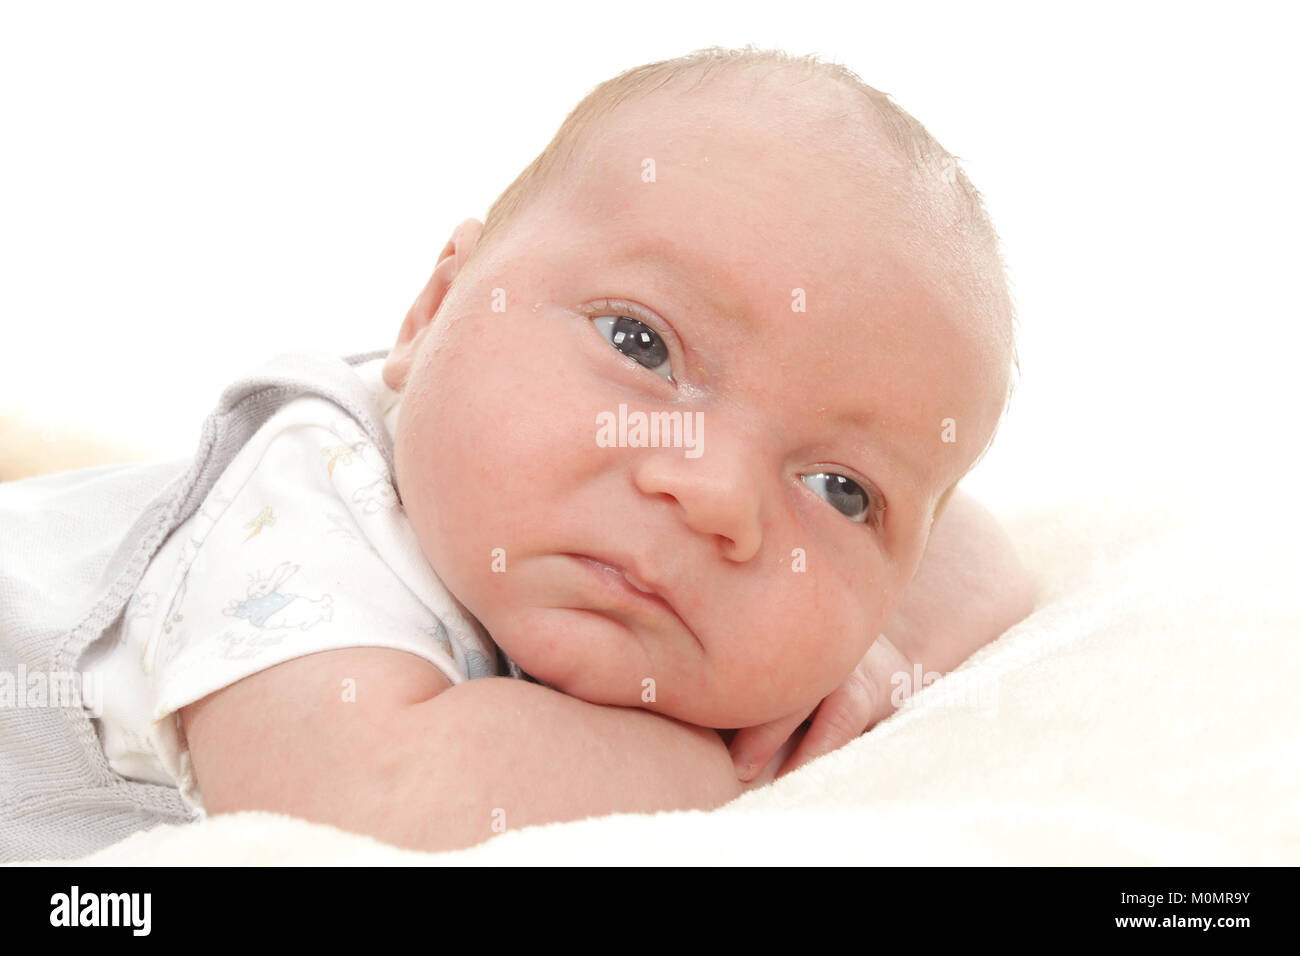 4 week old baby boy, 1 month old infant Stock Photo